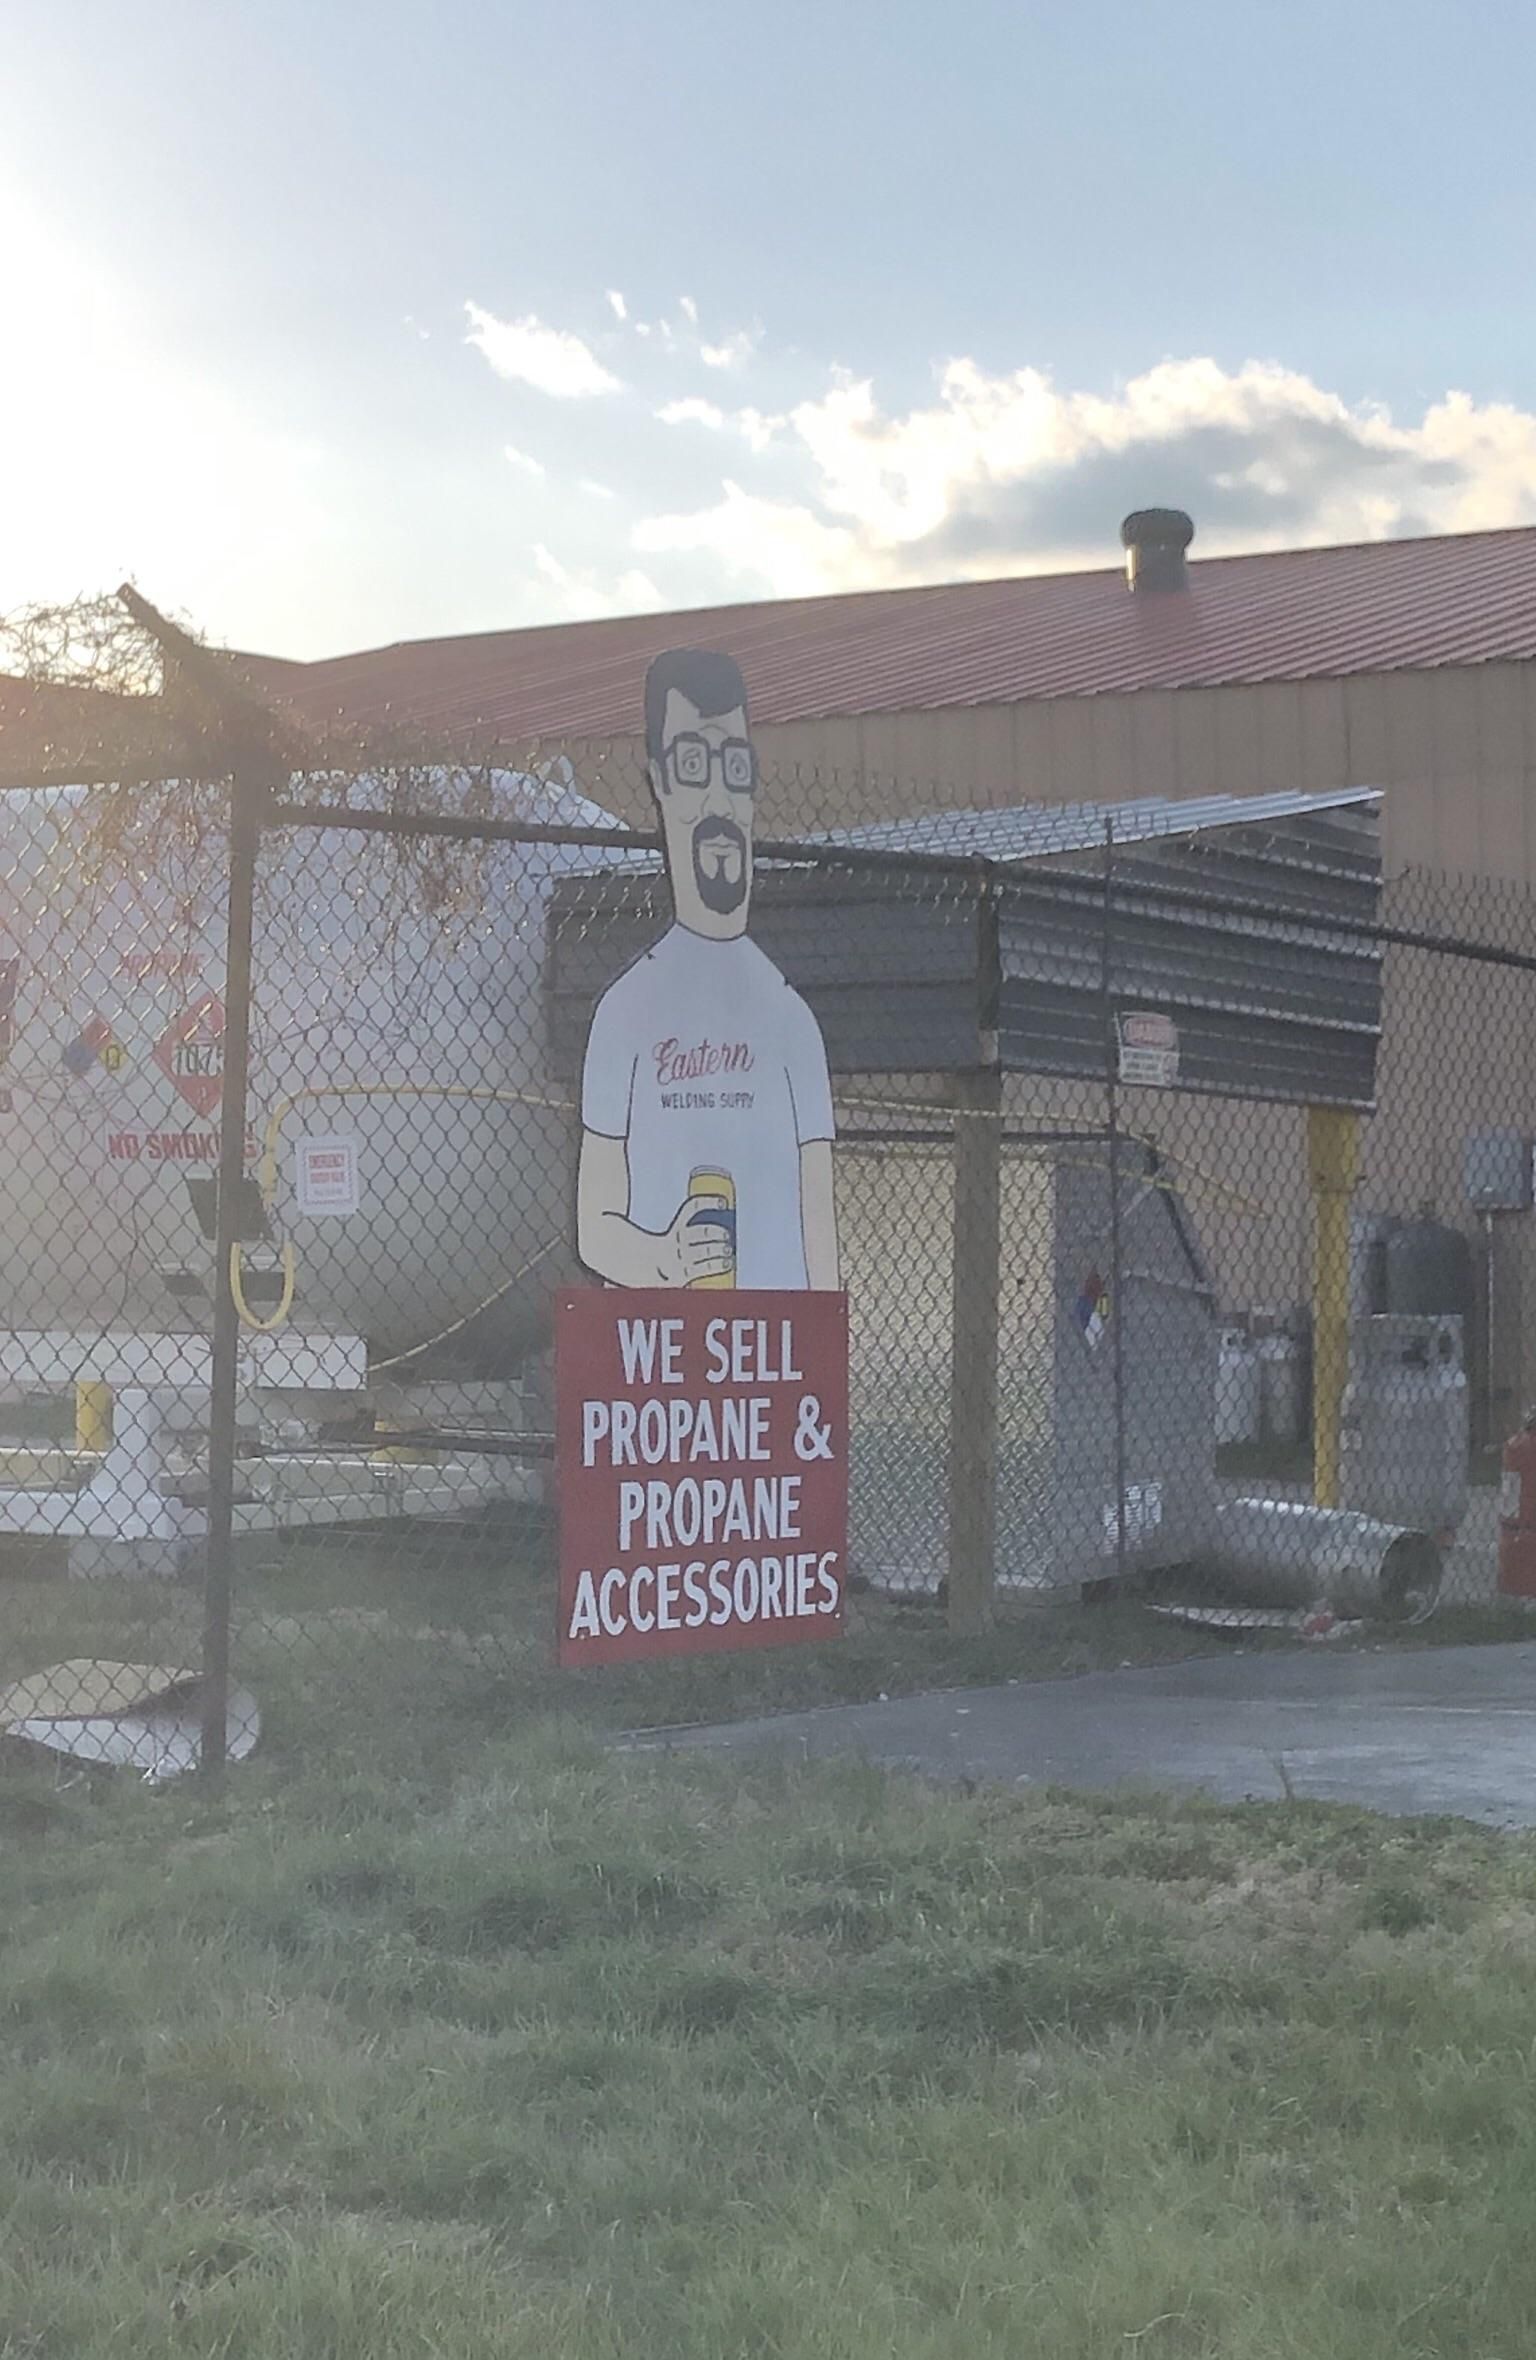 This sign in my hometown.